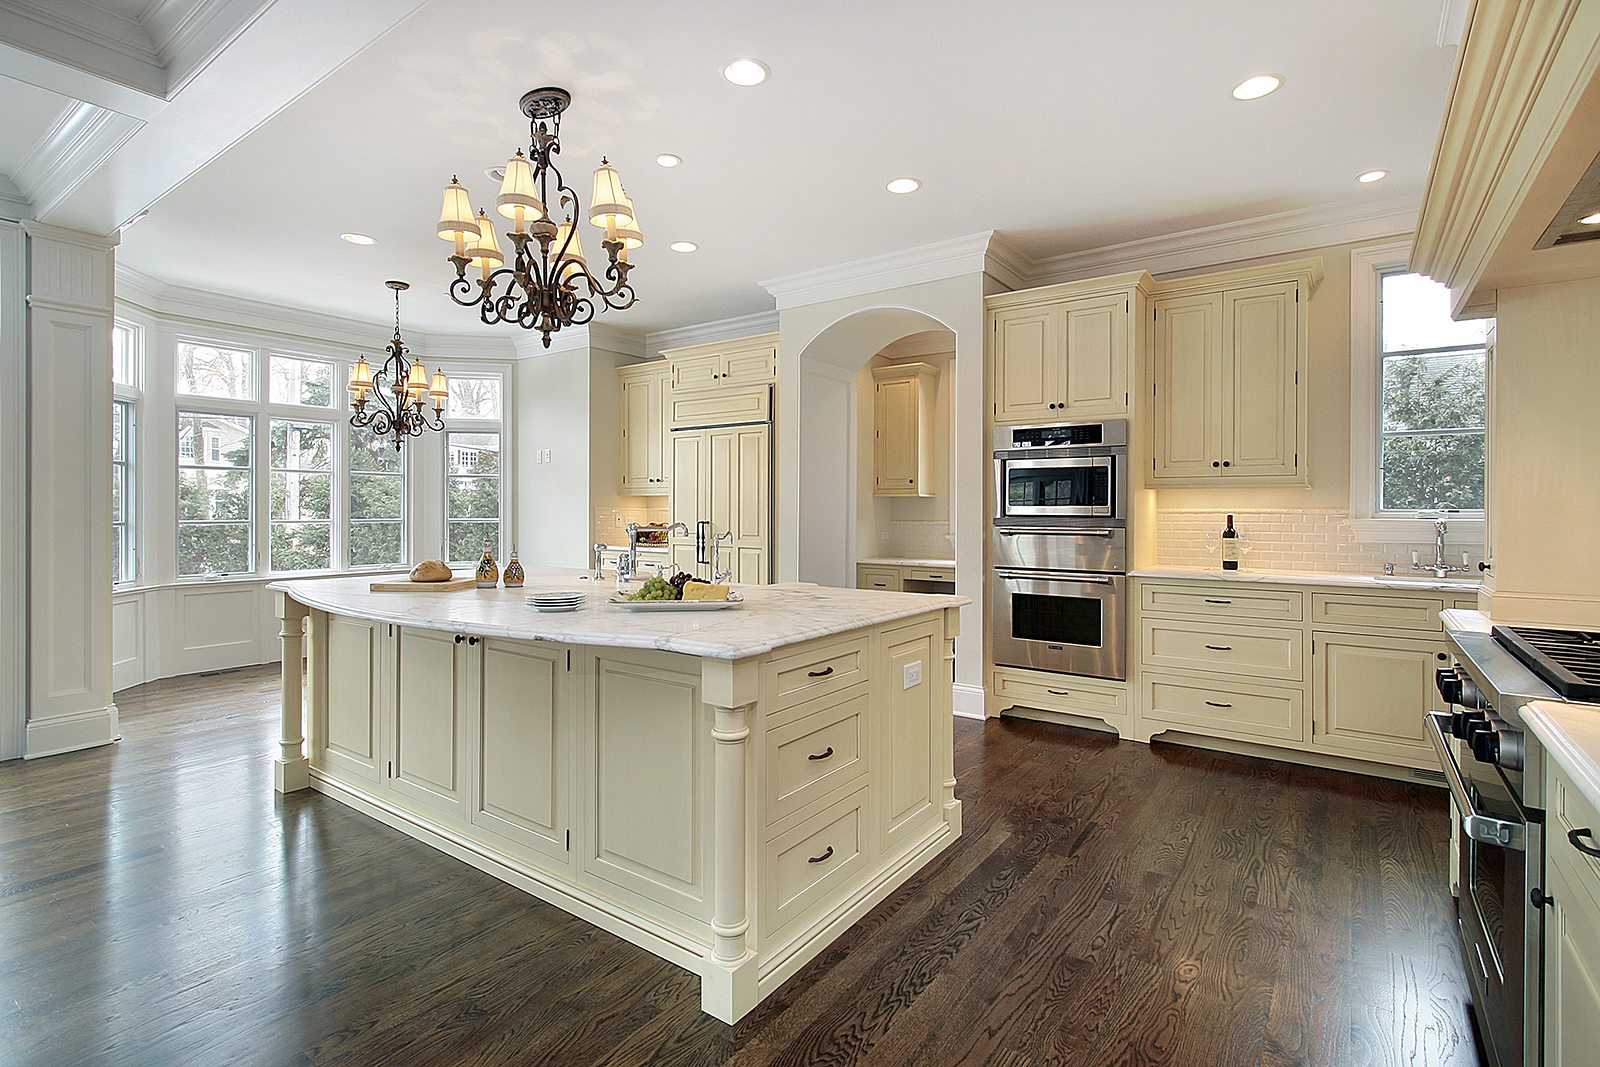 Should You Do a Major Kitchen Remodel Before You Sell Your Home in Tampa Bay